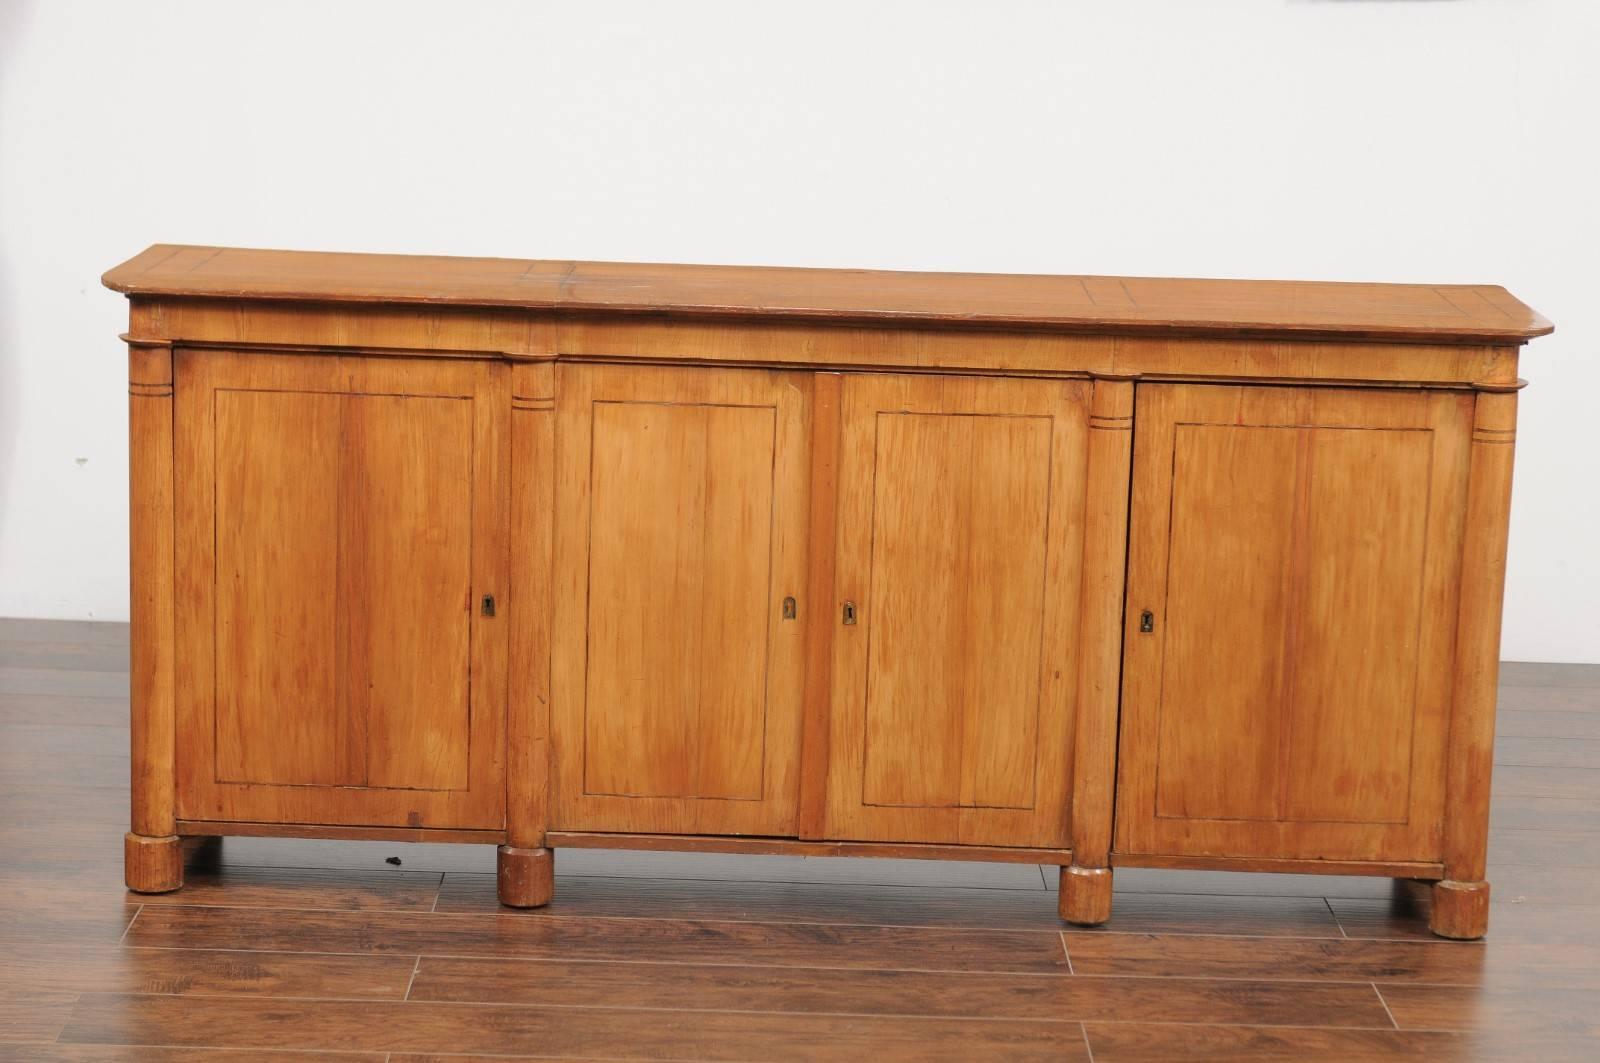 A German Biedermeier fruitwood veneered four-door enfilade with Doric-style semi-columns from the mid-19th century. This Biedermeier long buffet features a rectangular top with rounded corners and thin banded inlay, surmounting a set of double doors